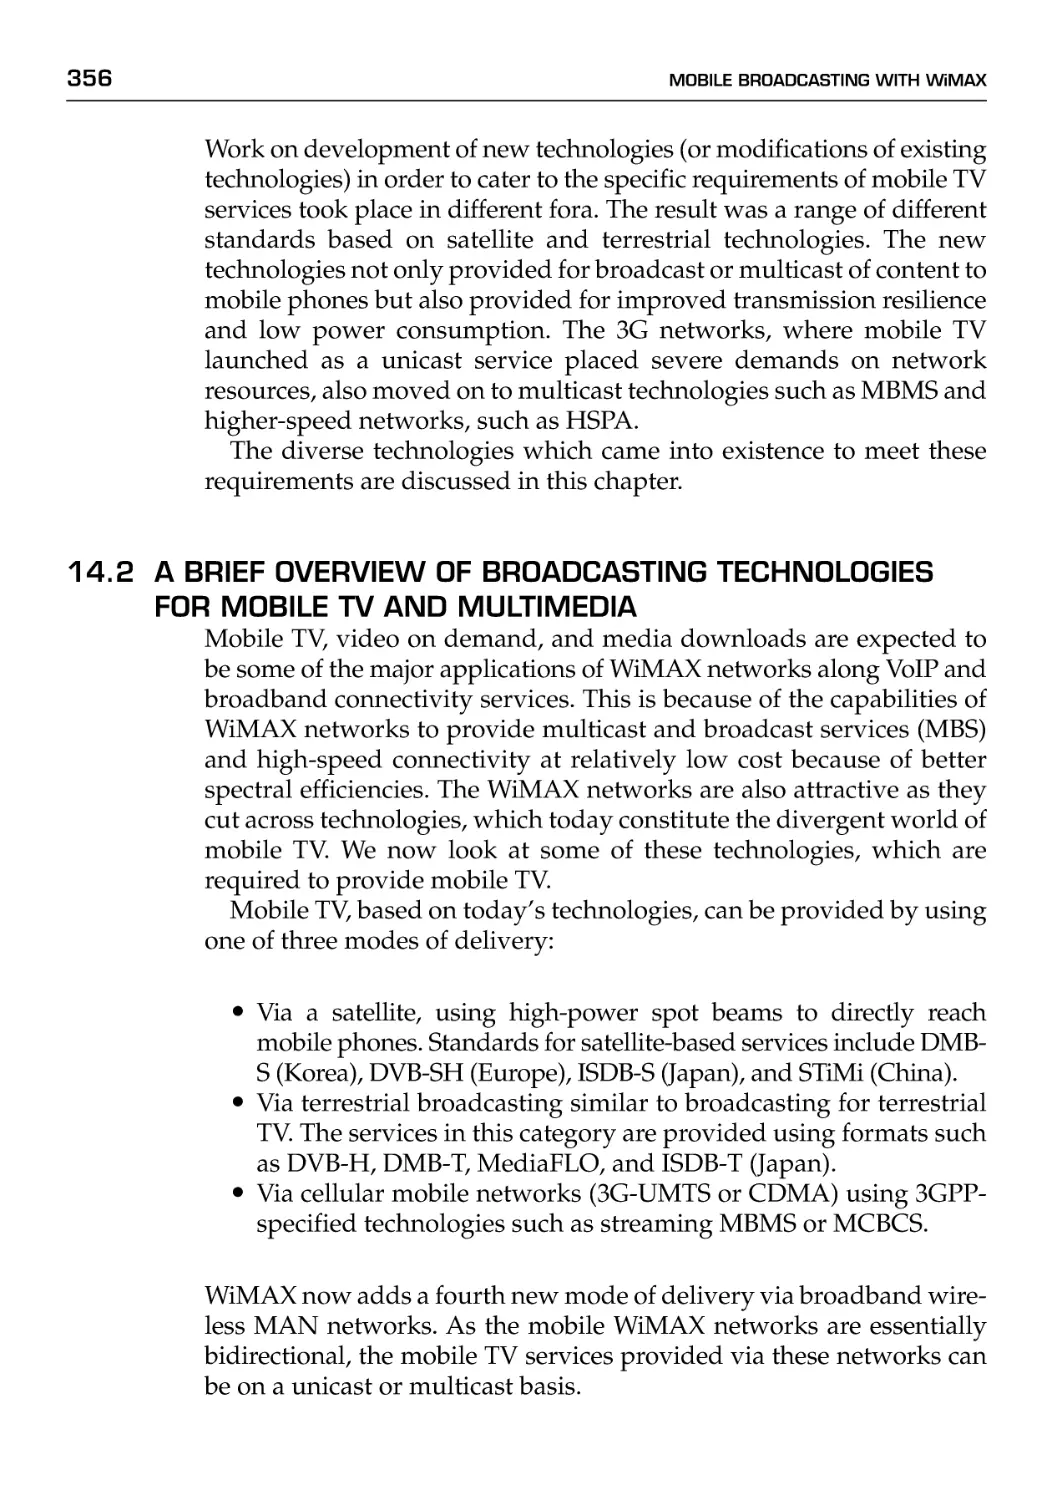 14.2 A Brief Overview of Broadcasting Technologies for Mobile TV and Multimedia